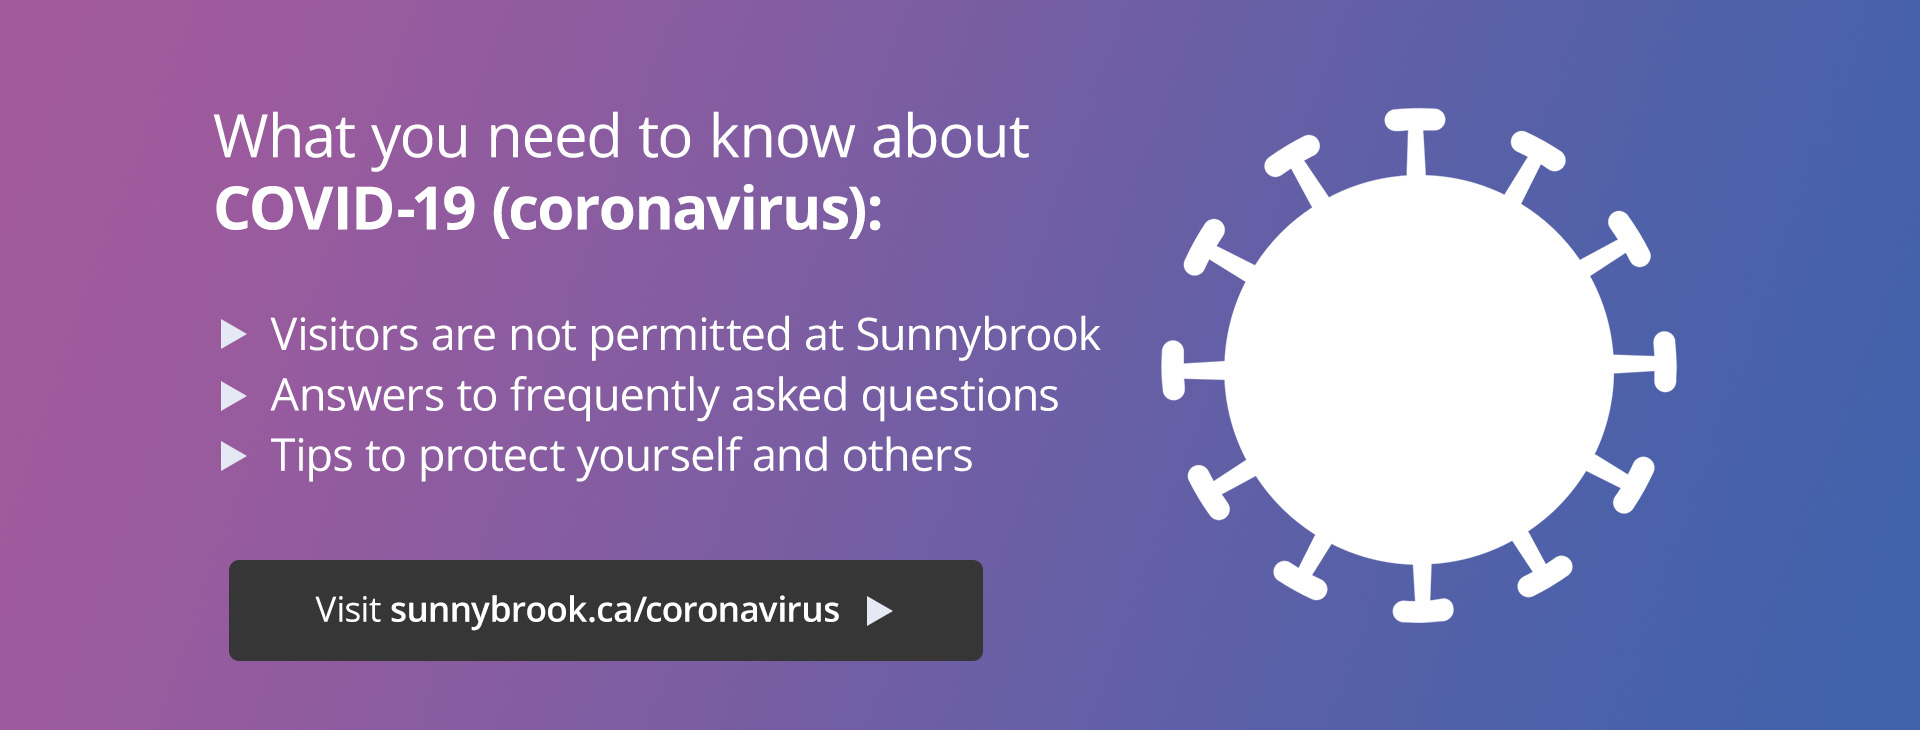 What you need to know about COVID-19: visitor restrictions at Sunnybrook, answers to frequently asked questions, and tips to protect yourself. Visit sunnybrook.ca/coronavirus